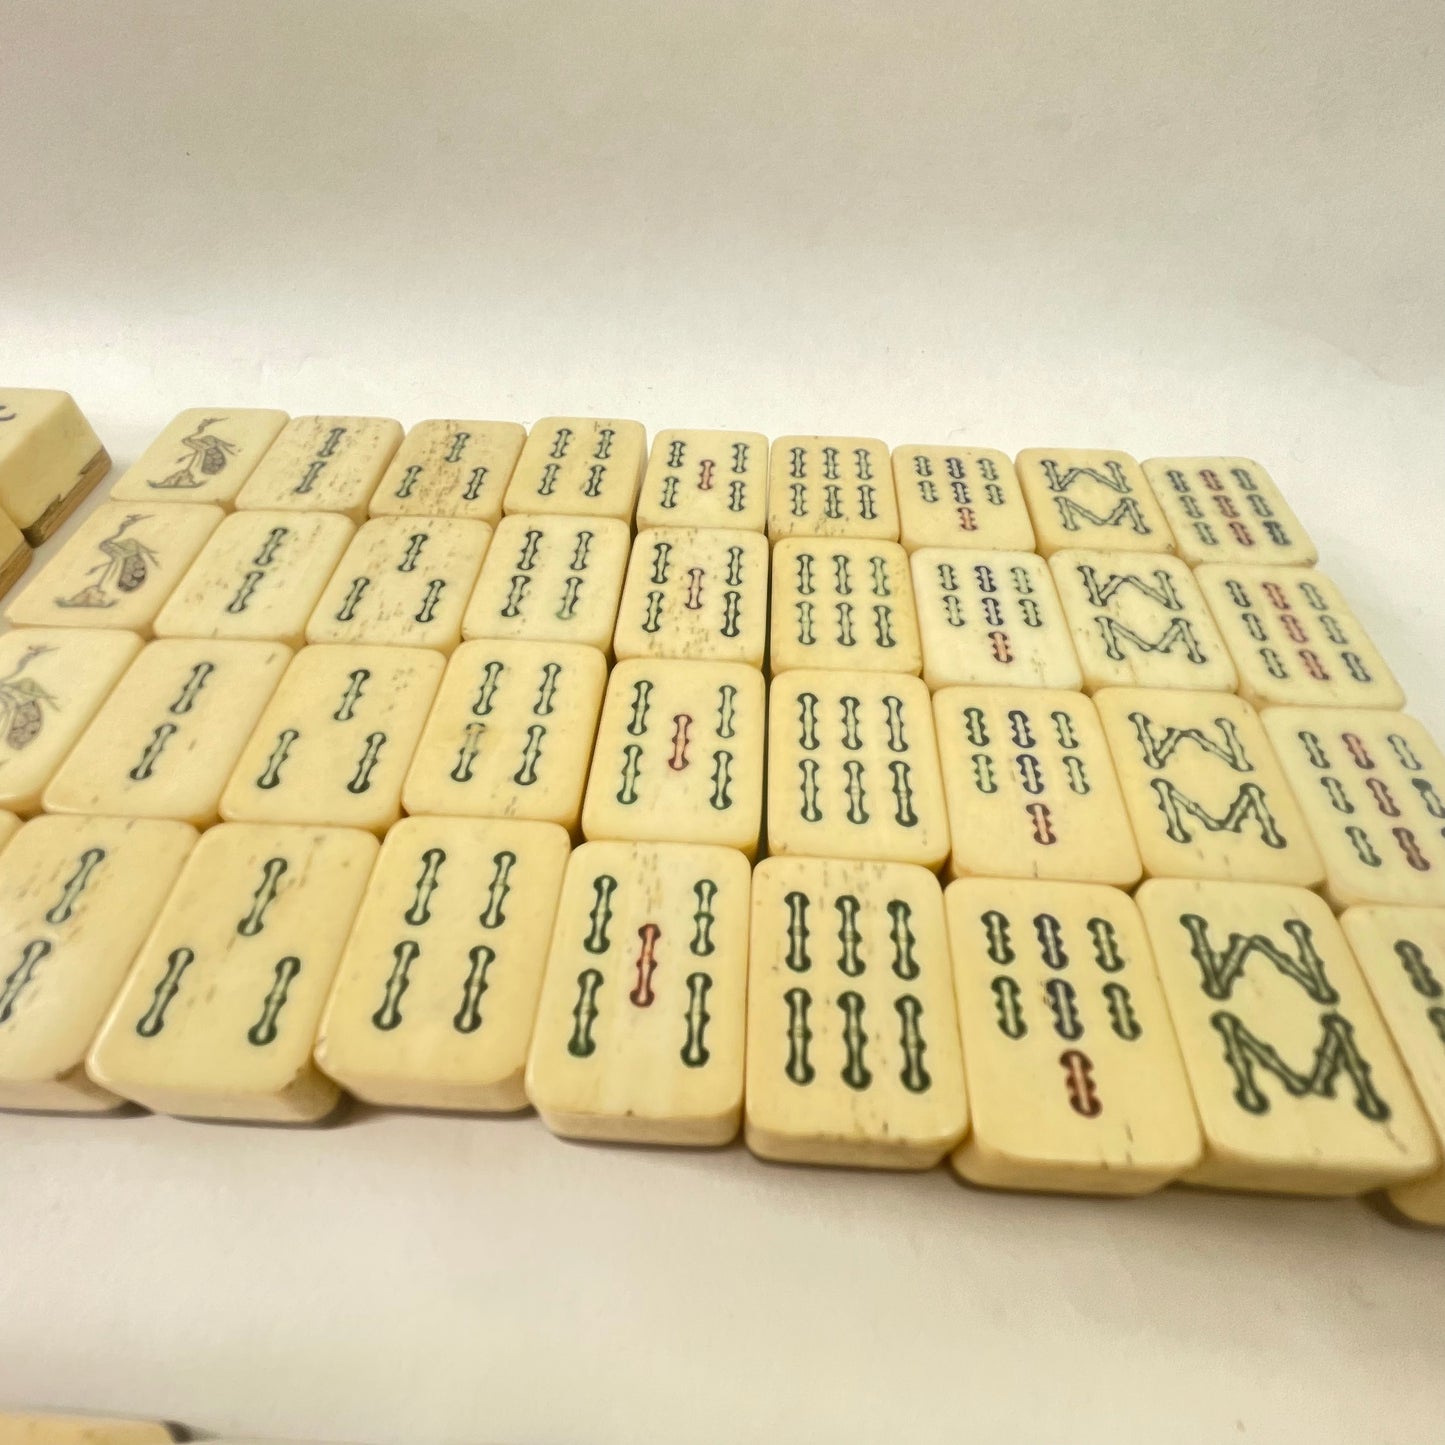 Antique Rare Chinese Mahjong Set (no English no Arabic Numerals) Small 2” x 2.5” Tiles Special Tiles, Sage, Cat, Mouse & Flowers